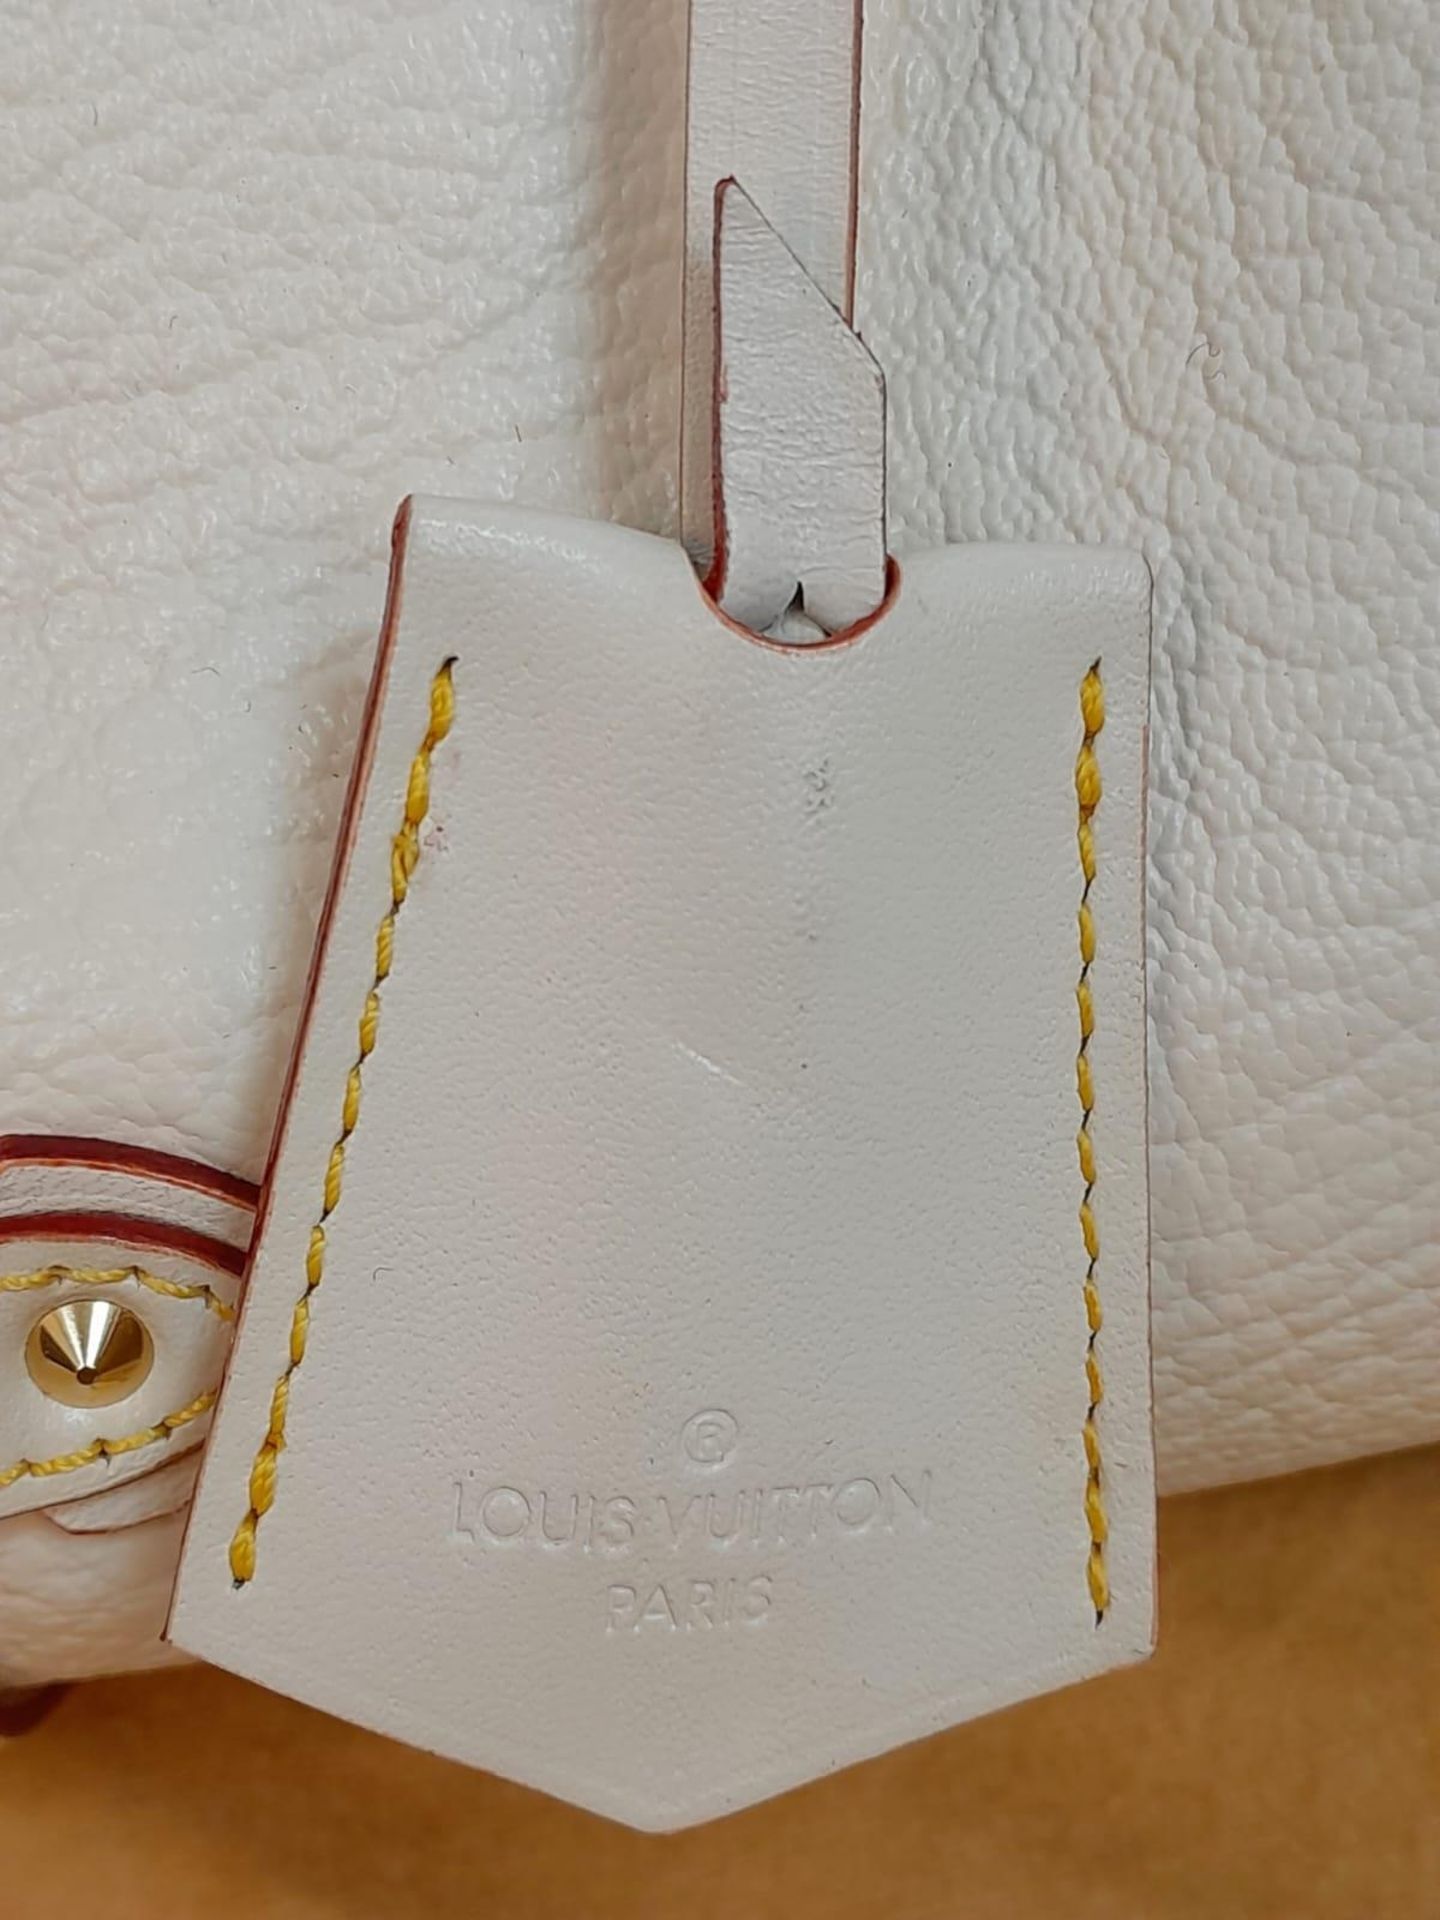 A Louis Vuitton Manhattan PM Suhali Leather Handbag. Soft white textured leather exterior with - Image 6 of 9